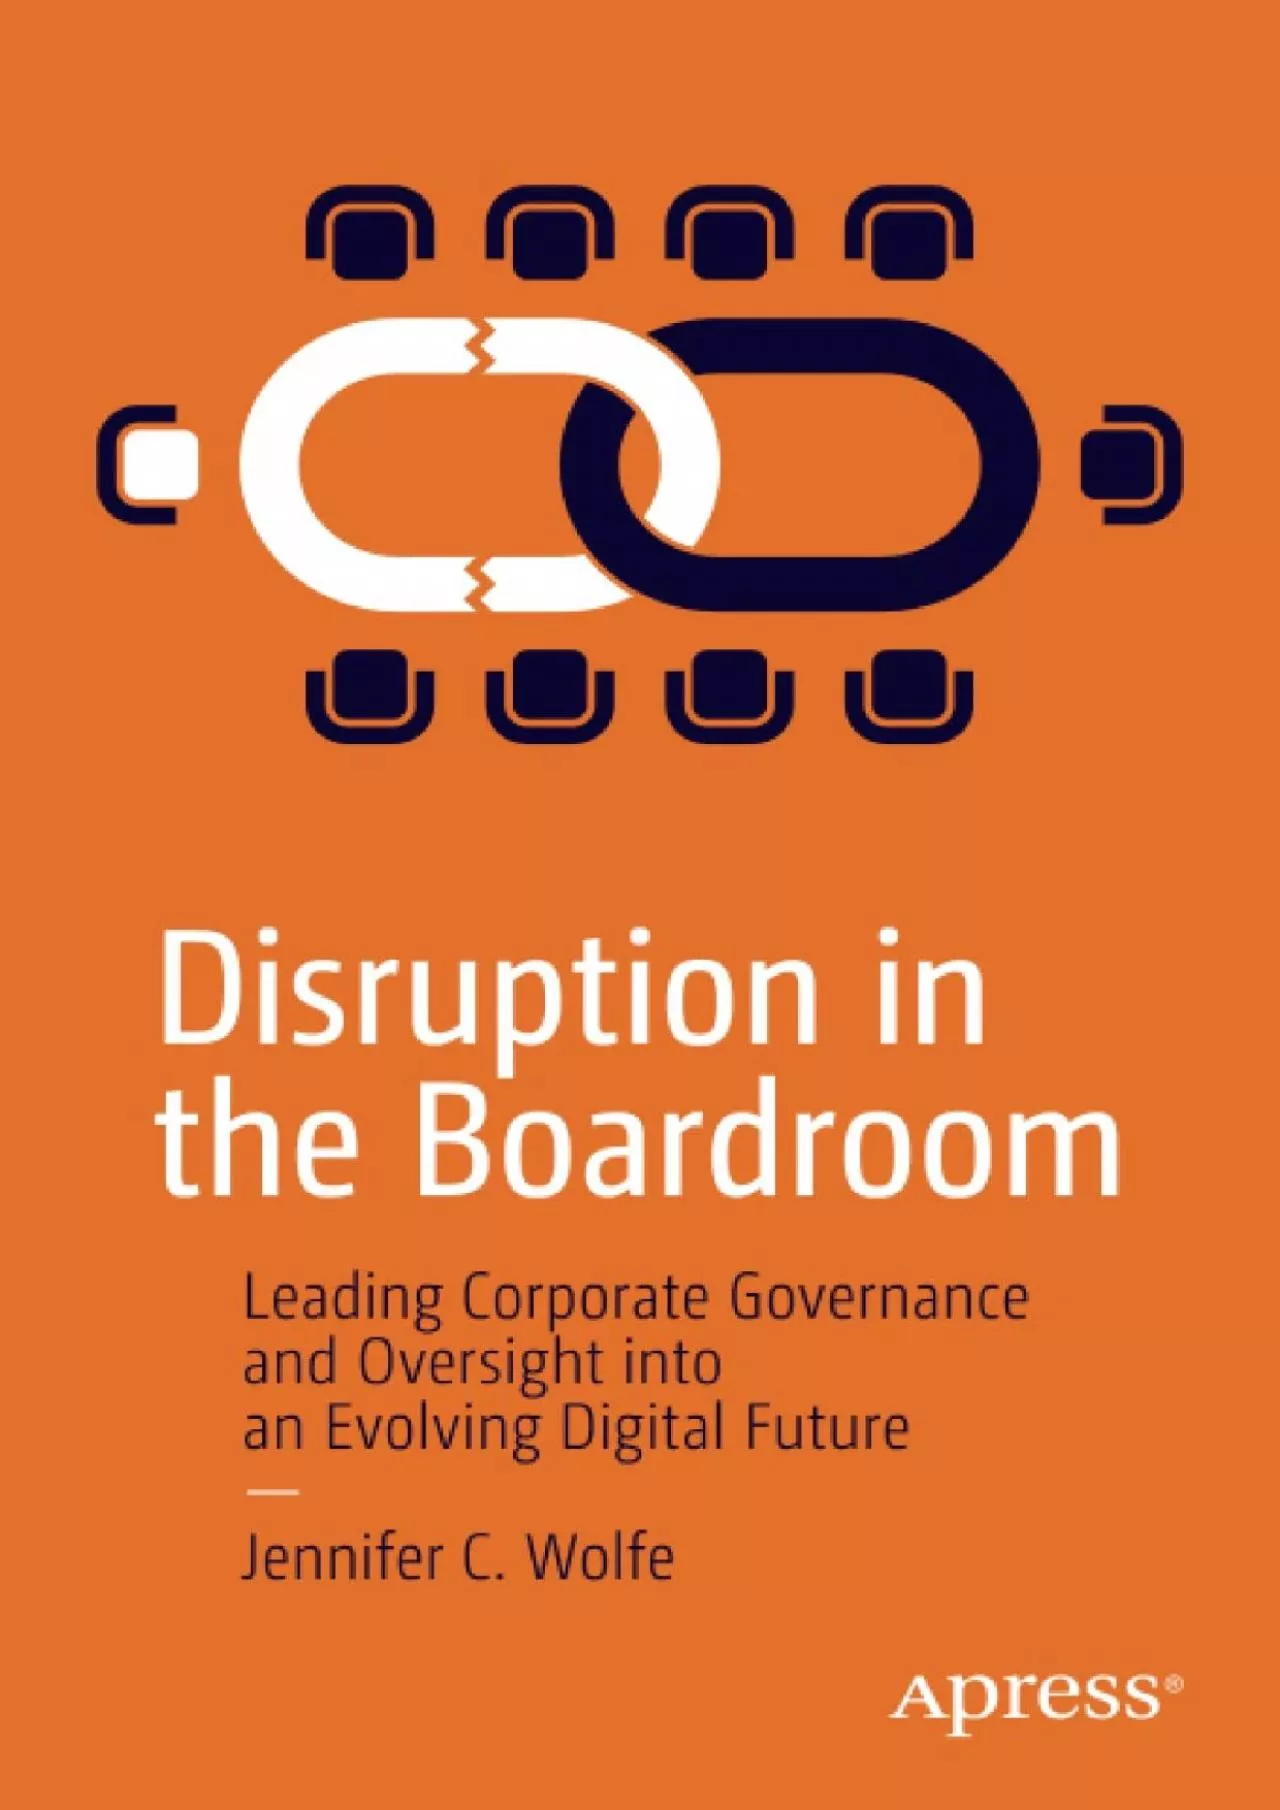 (BOOS)-Disruption in the Boardroom: Leading Corporate Governance and Oversight into an